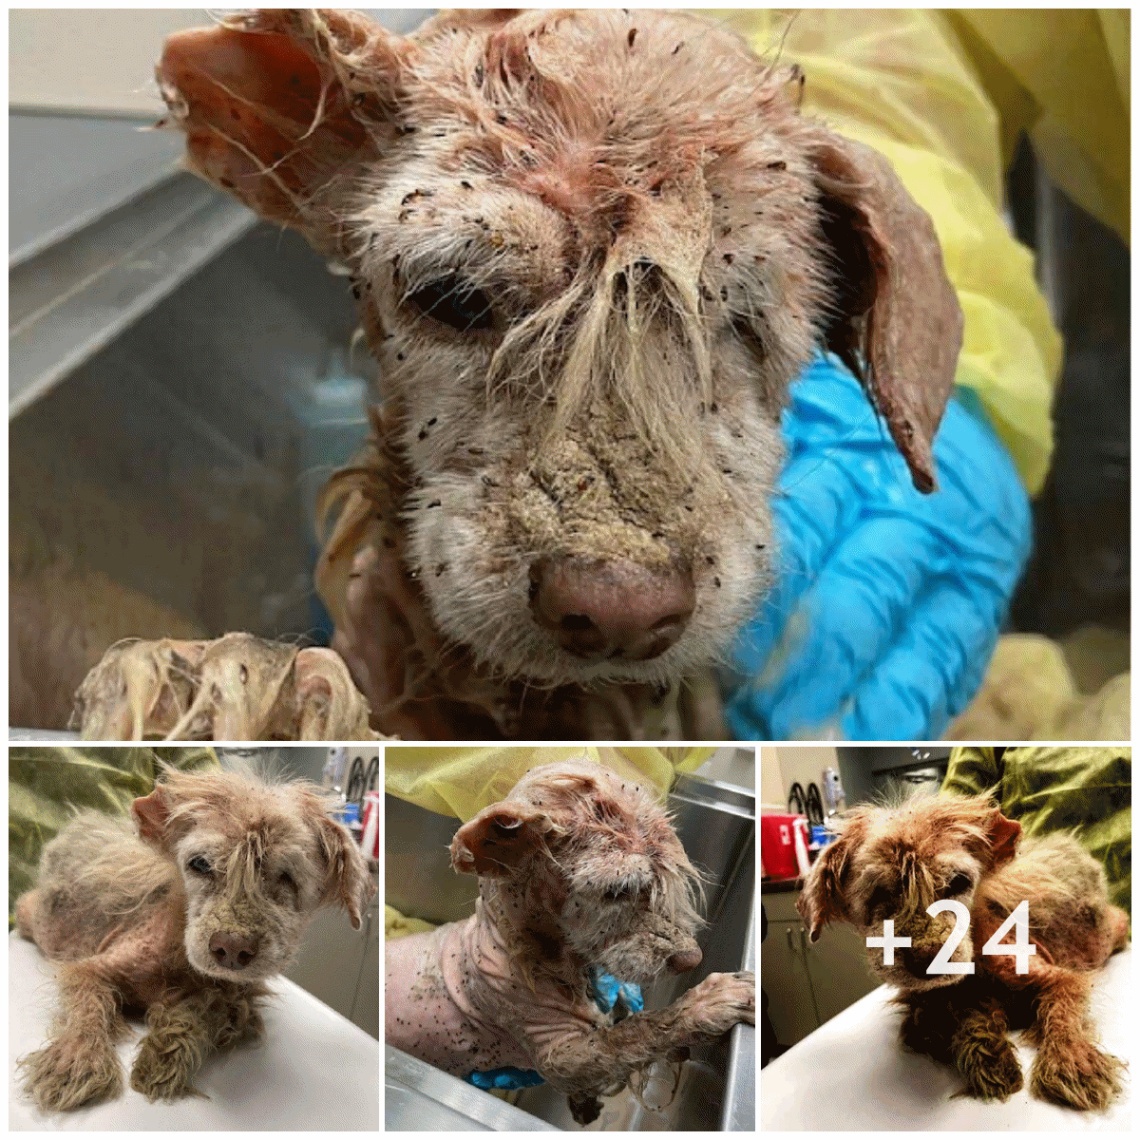 The poor dog was missing half an ear and was covered in fleas because he had been wandering the streets for many years looking for his owner.